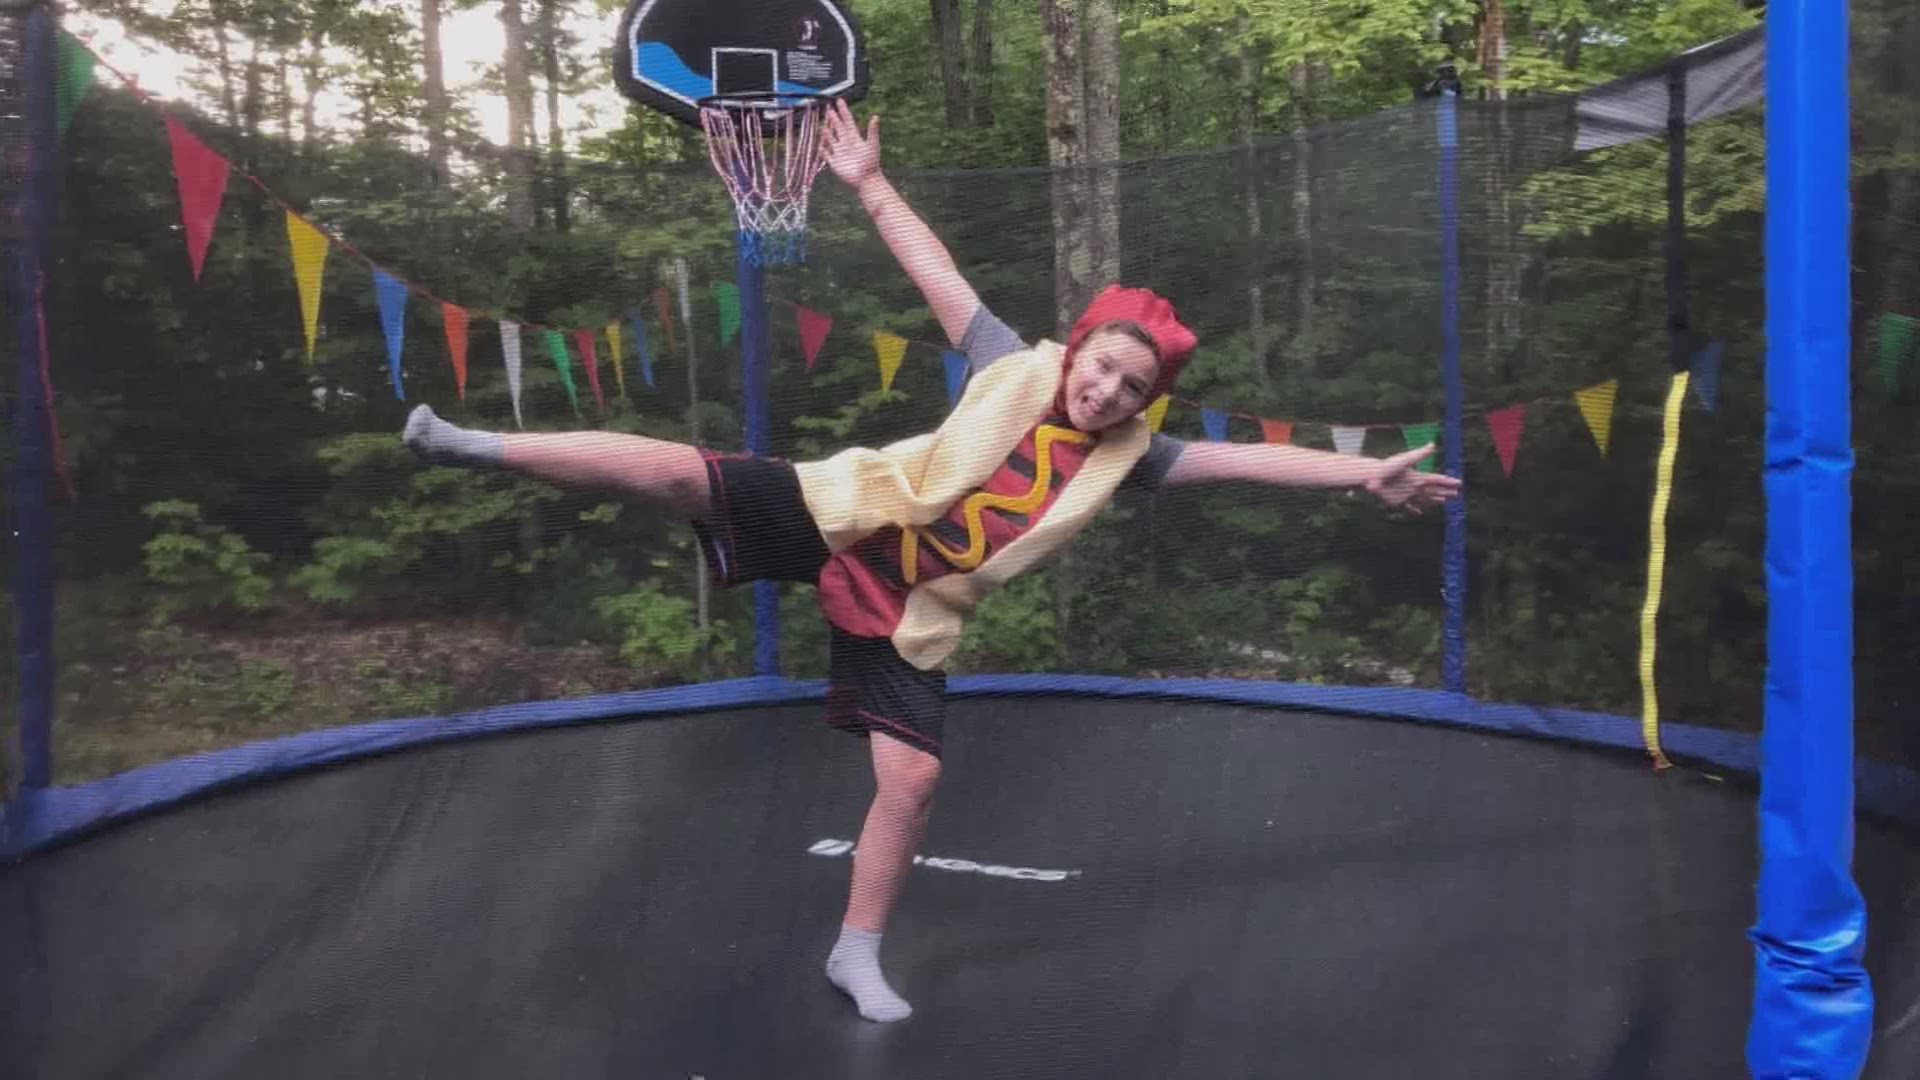 Jackson Welch plans to trampoline for 24 hours to support the ARLGP